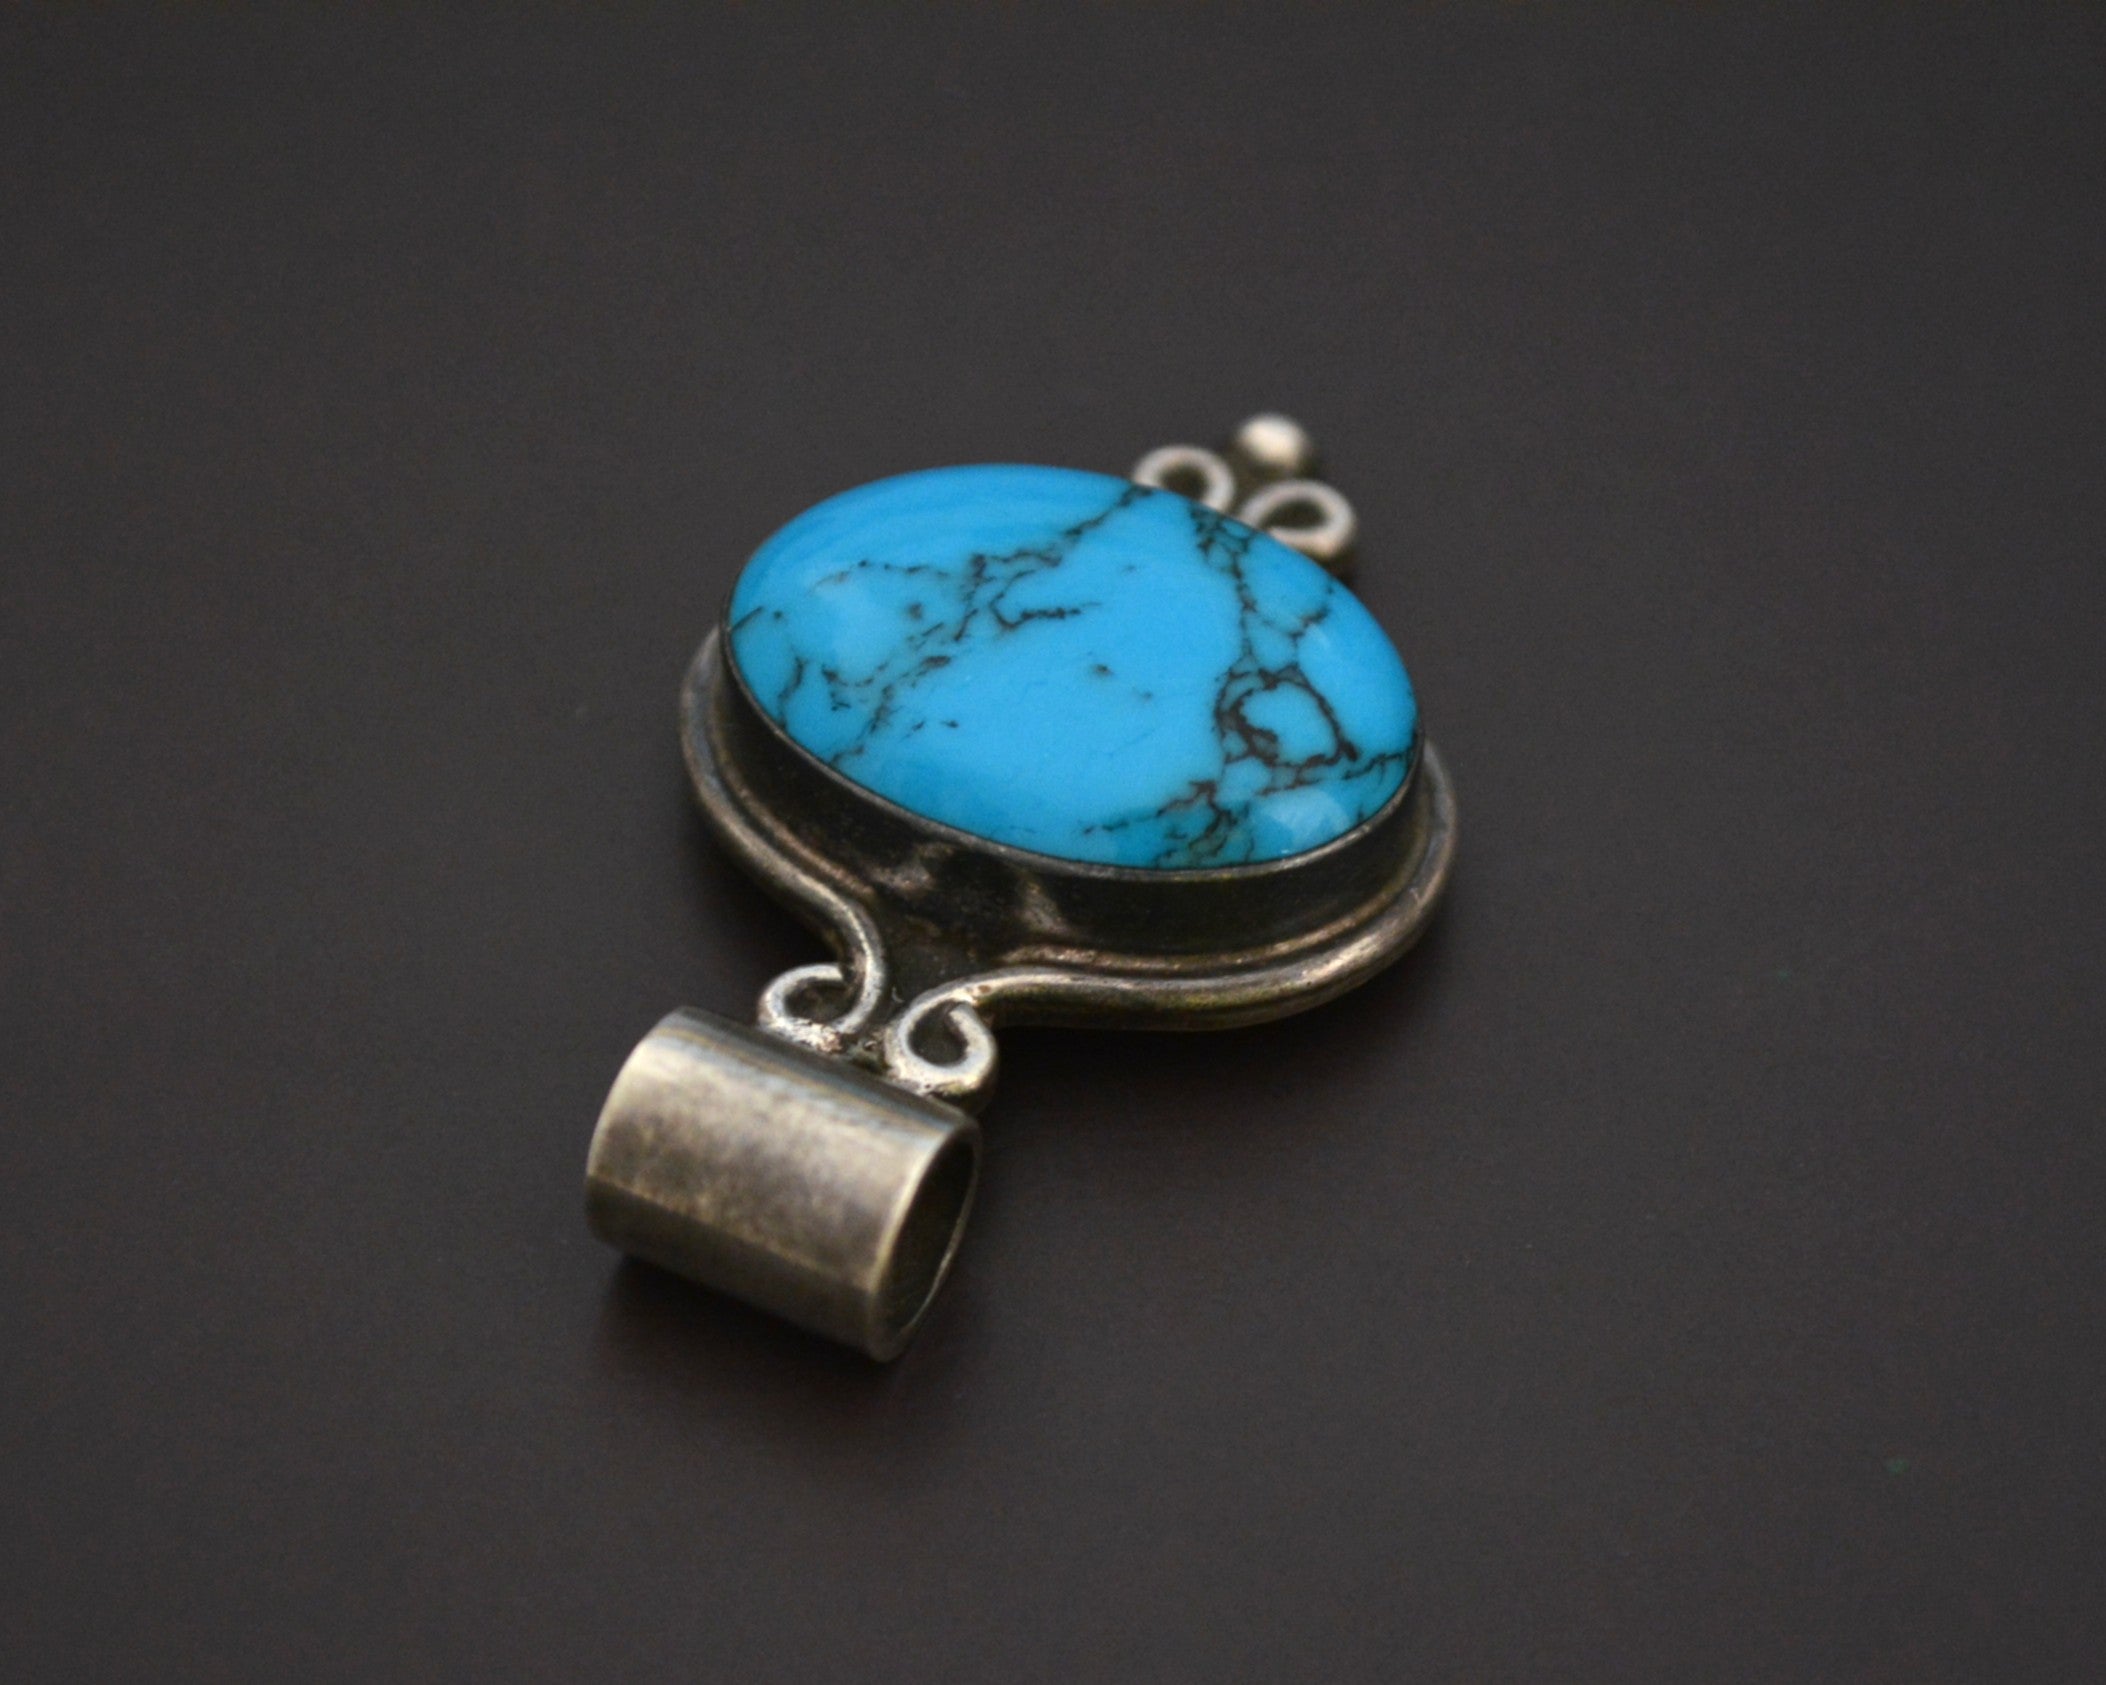 Ethnic Turquoise Pendant from Mexico